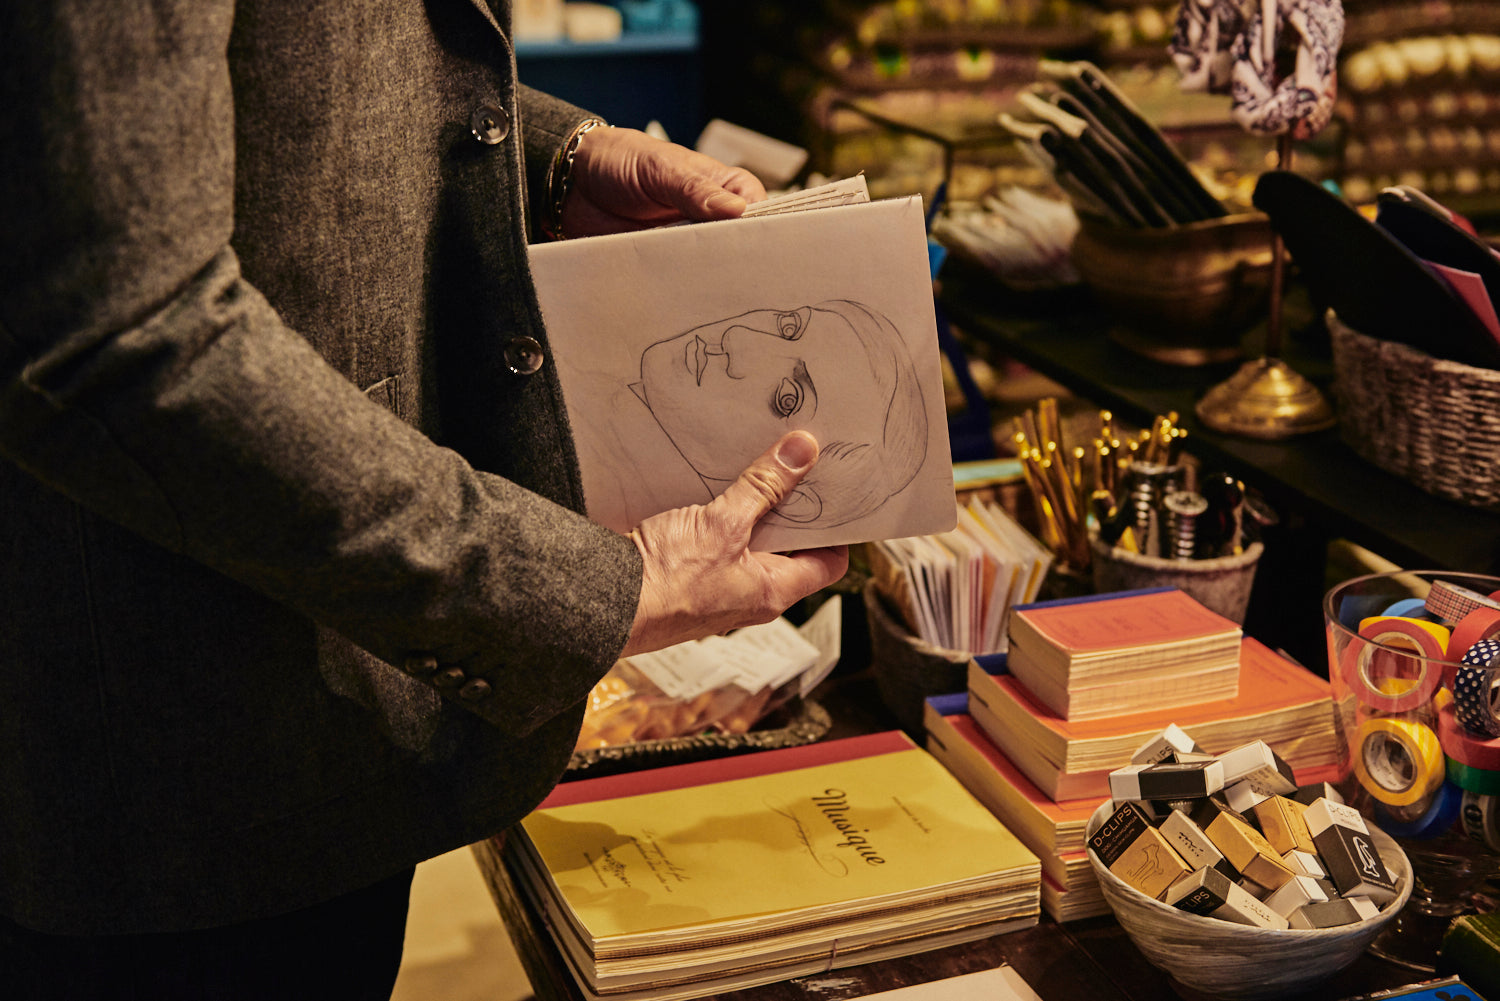 Detail of a man’s hands holding a pencil drawing of a face. A nearby table is merchandised with books, washi tape, paperclips, and décor items.